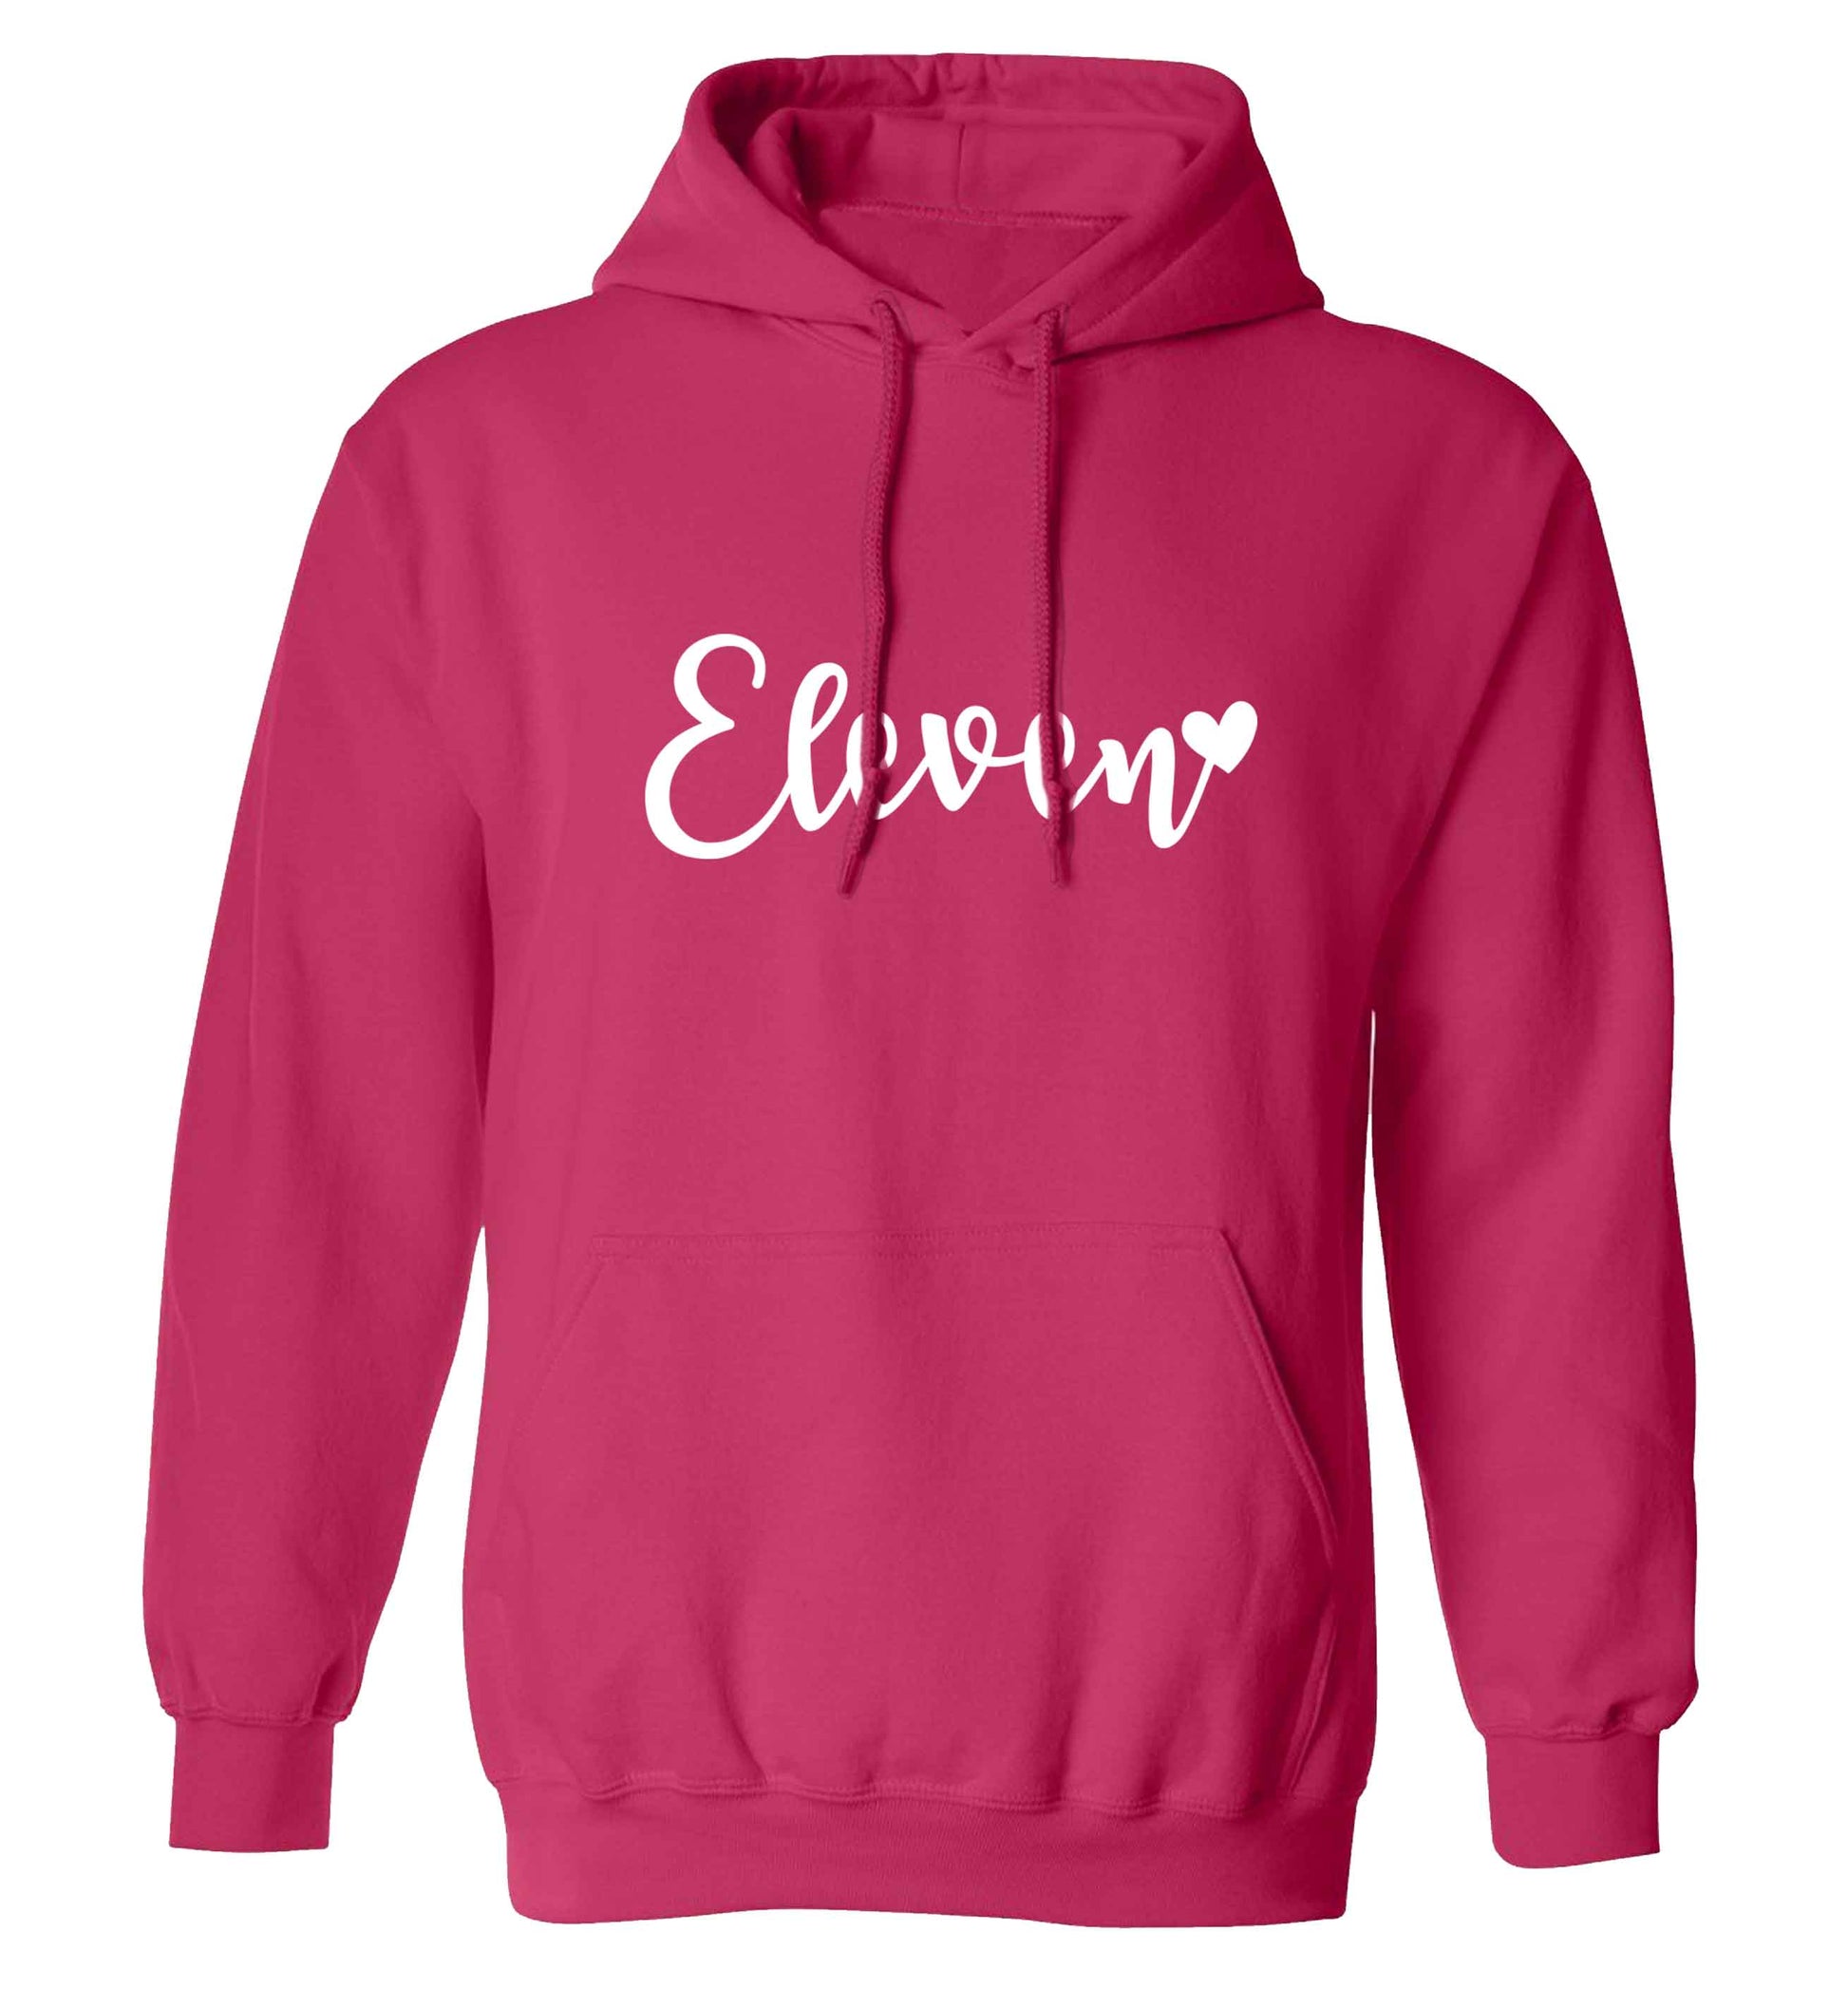 Eleven and heart! adults unisex pink hoodie 2XL